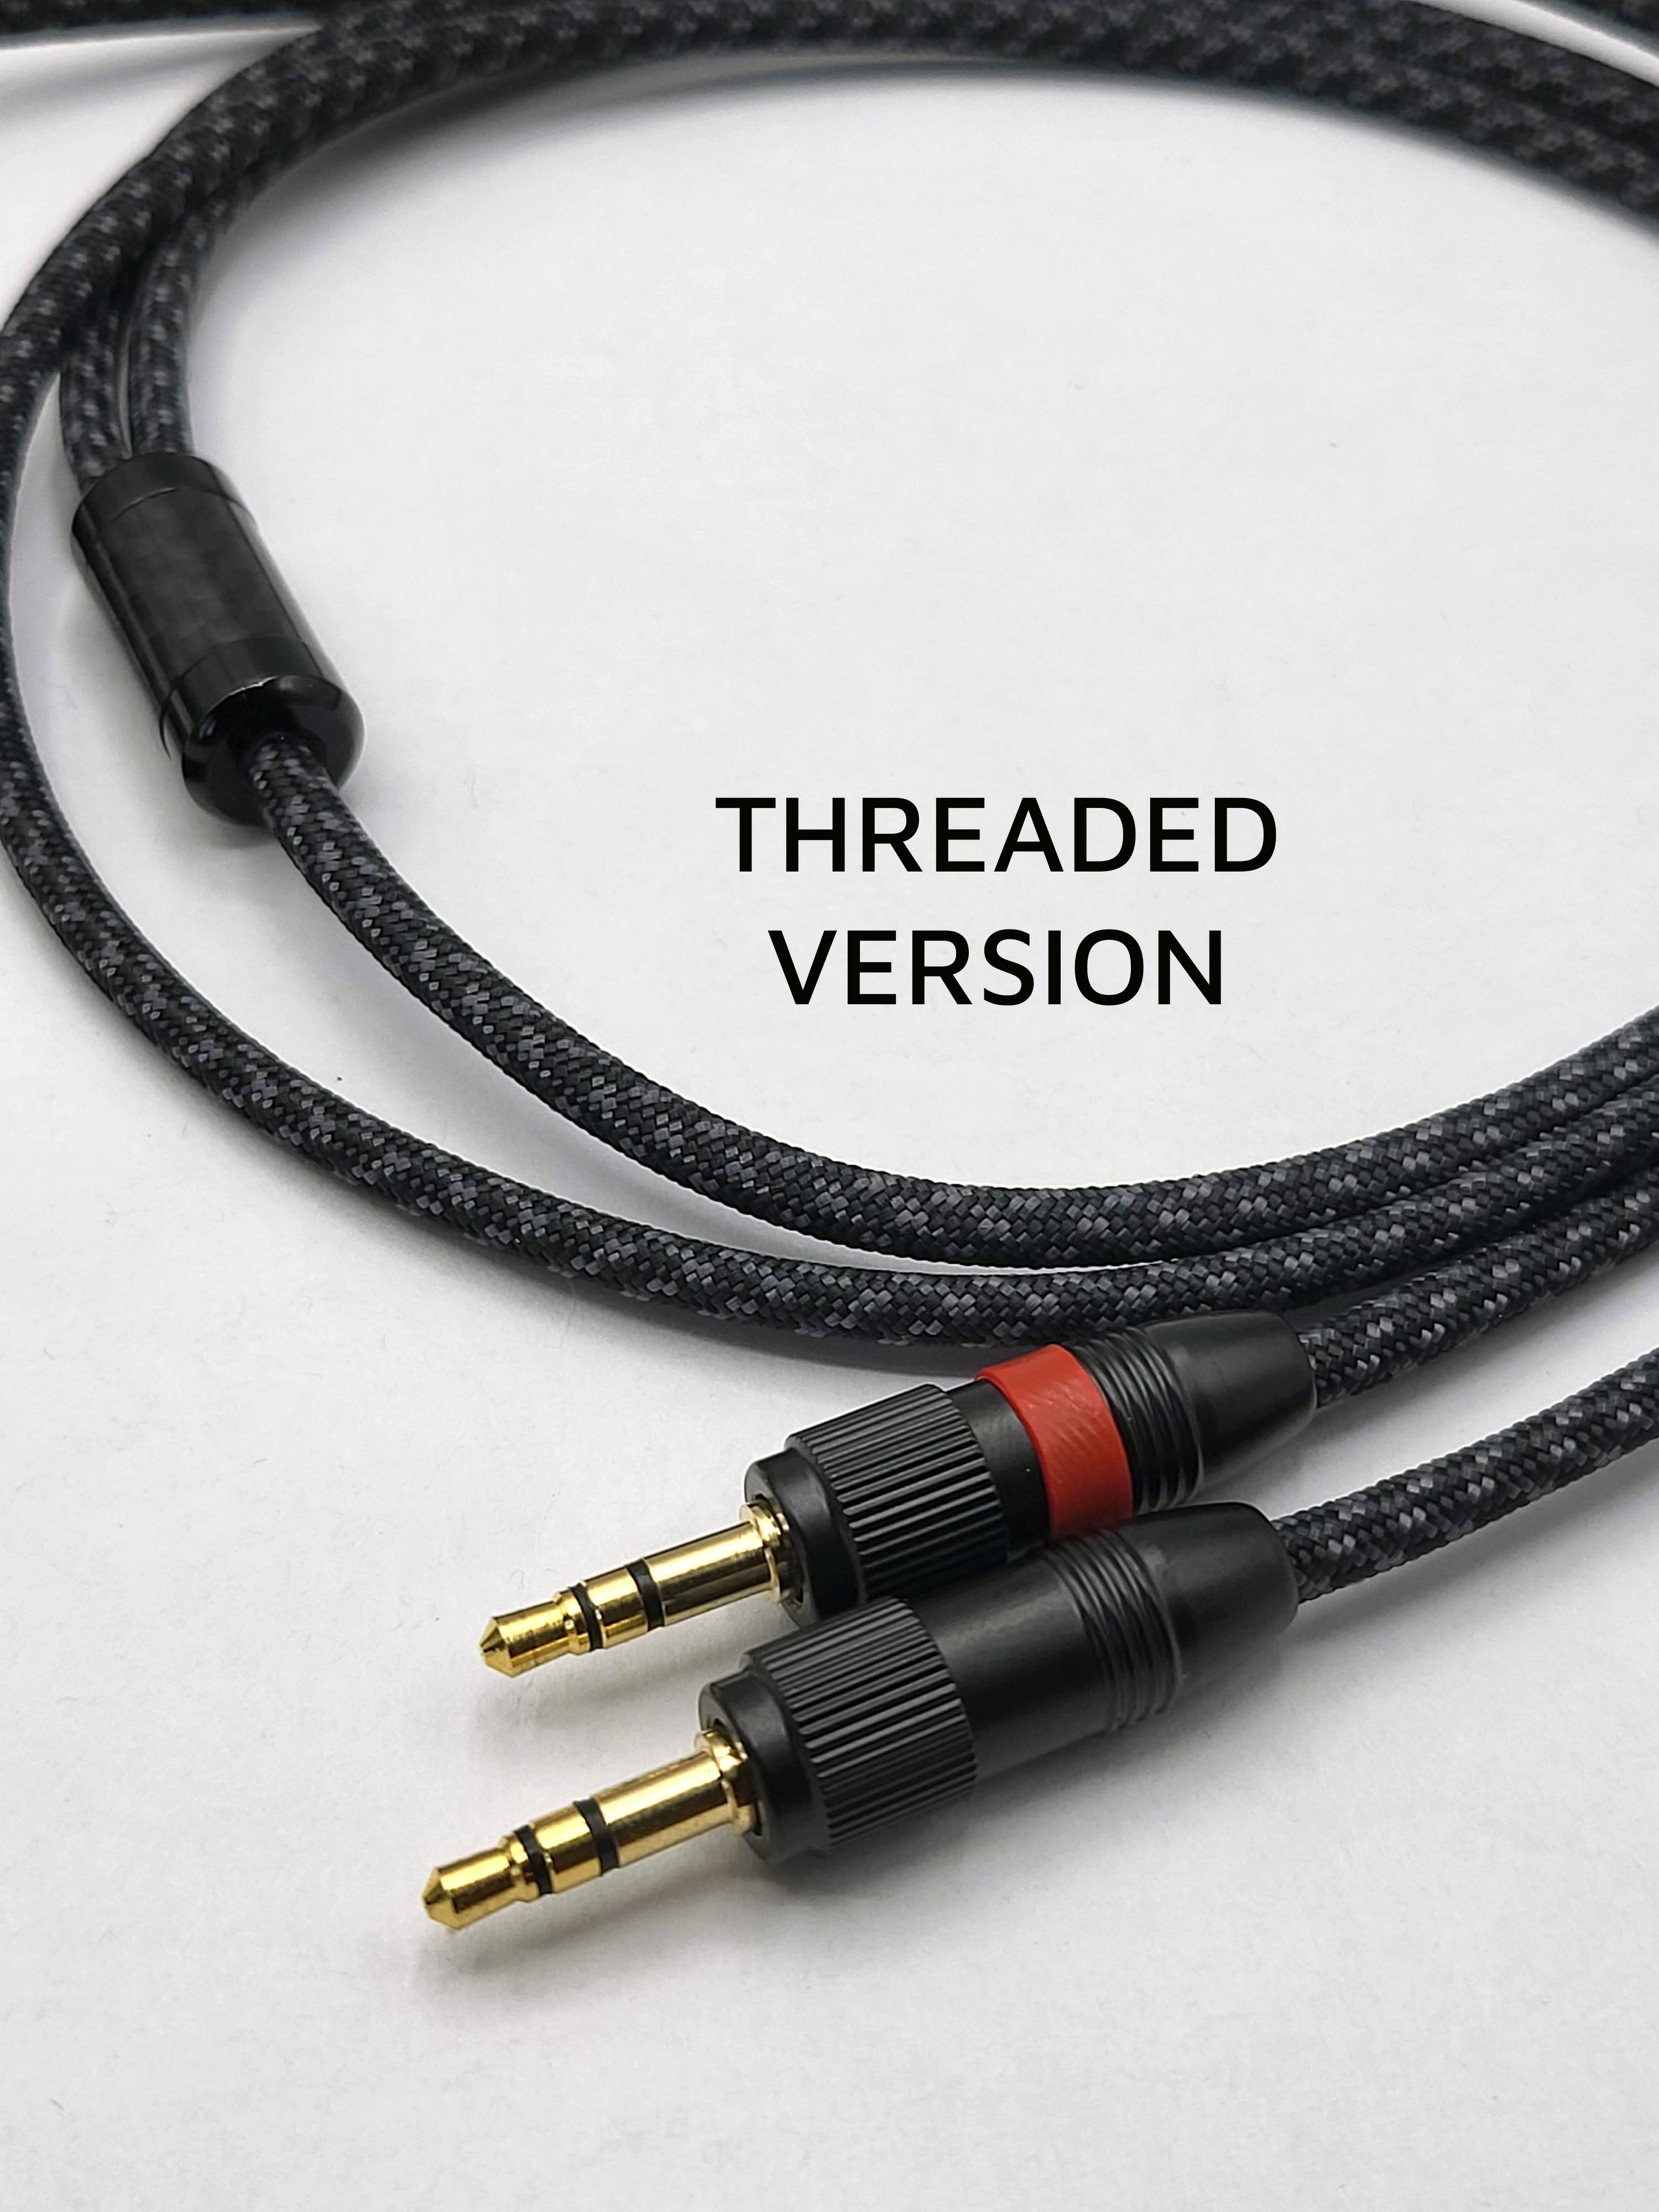 SONY MDR-Z7 Z7R Z1R (Threaded Connectors) Headphone Cable  - Balanced or Single Ended